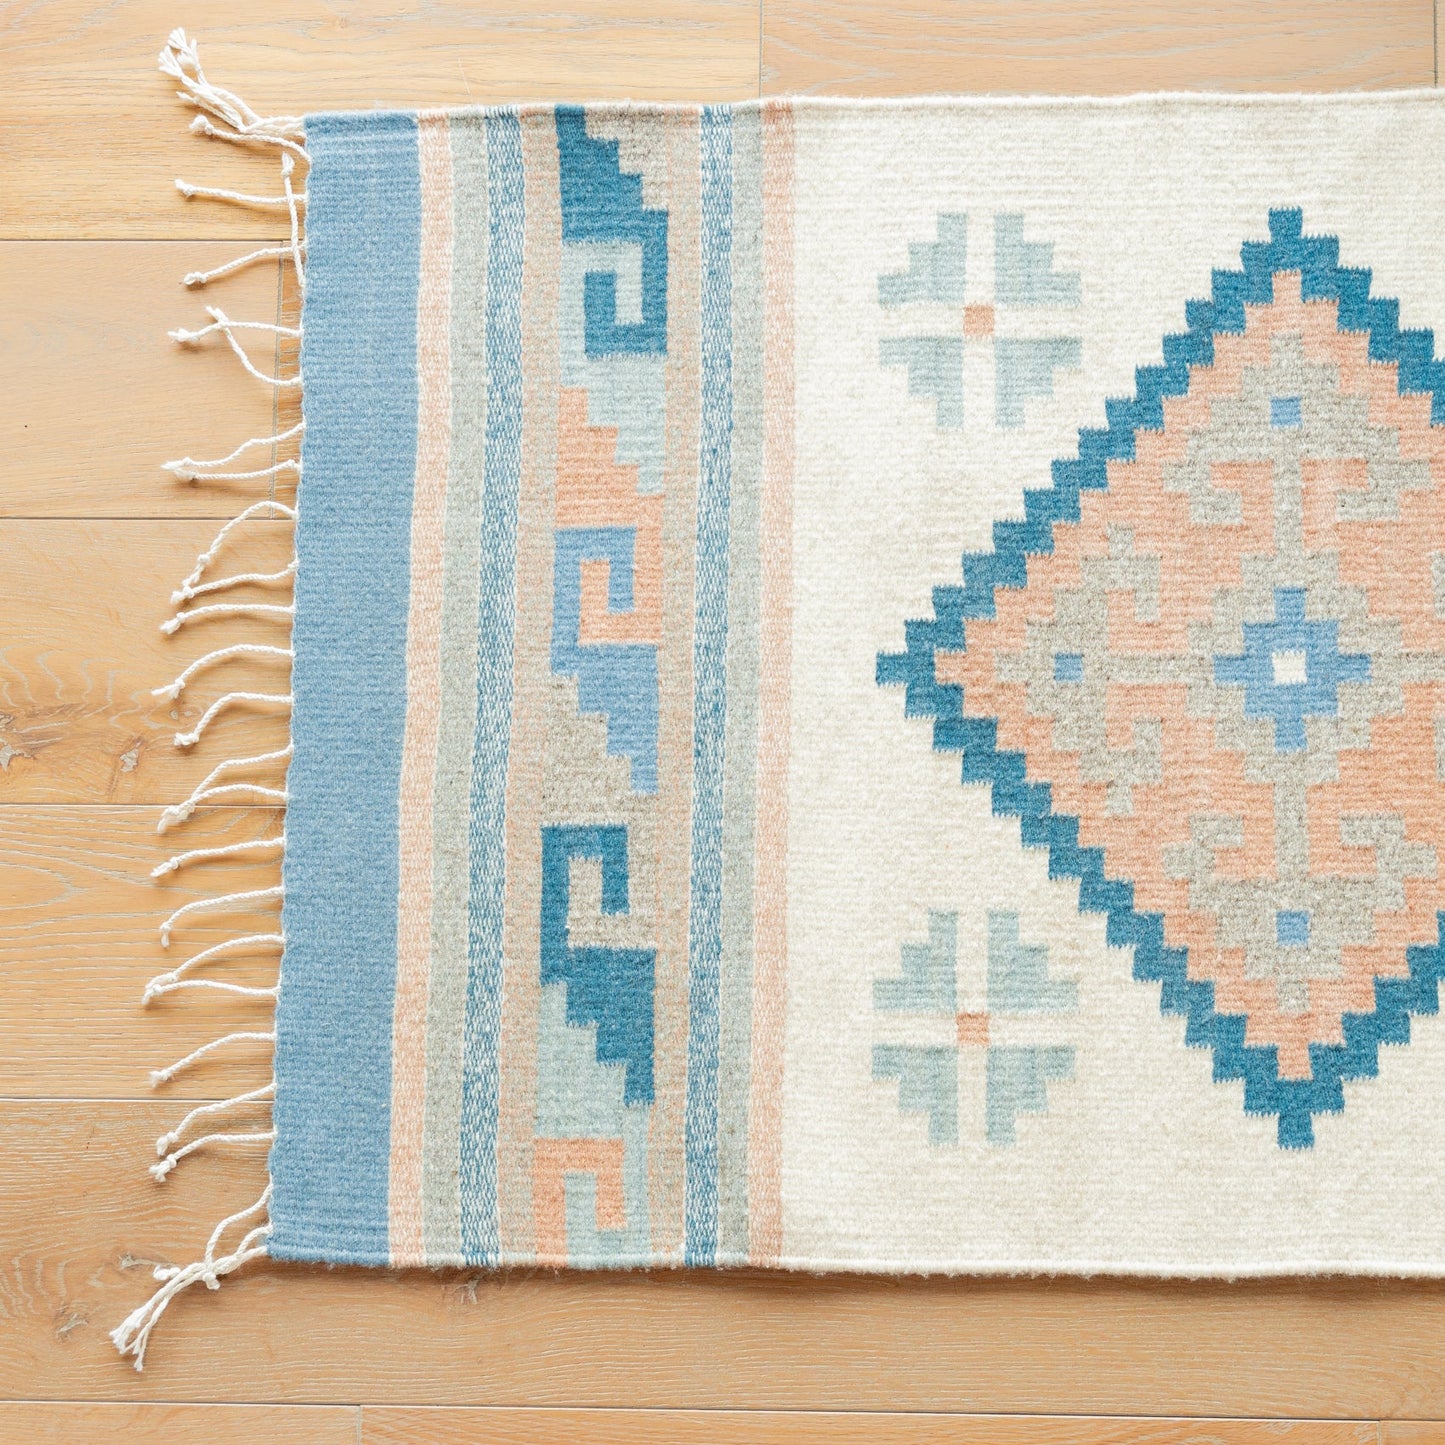 MEXICO COLLECTION - ZAPOTEC HAND-LOOMED WOOL RUG - 2 x 3' - NO. 17395